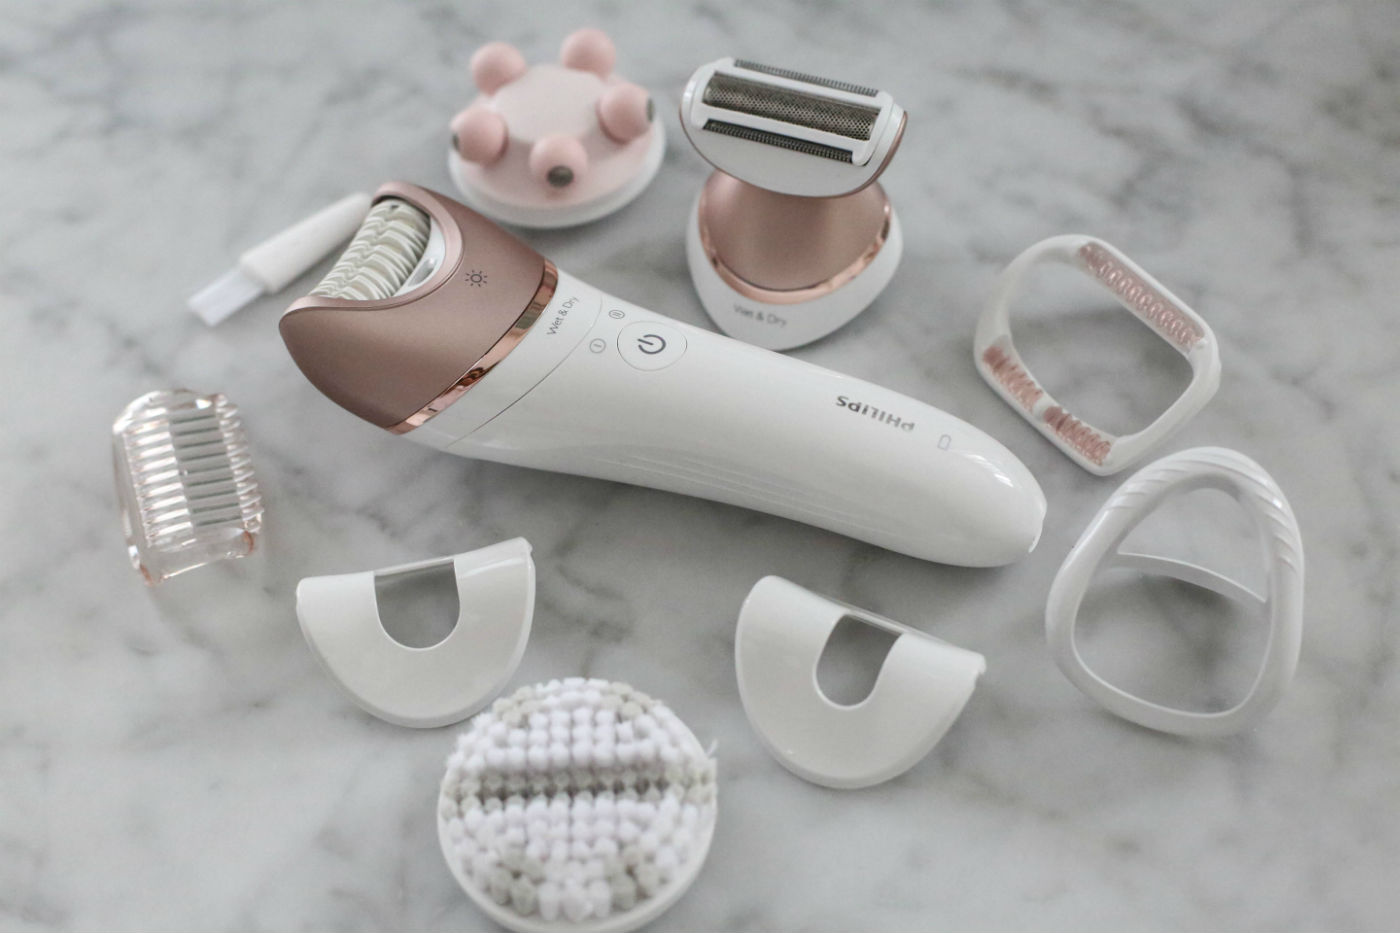 PHILIPS SATINELLE ADVANCED WET & DRY EPILATOR | AD – Lily Pebbles